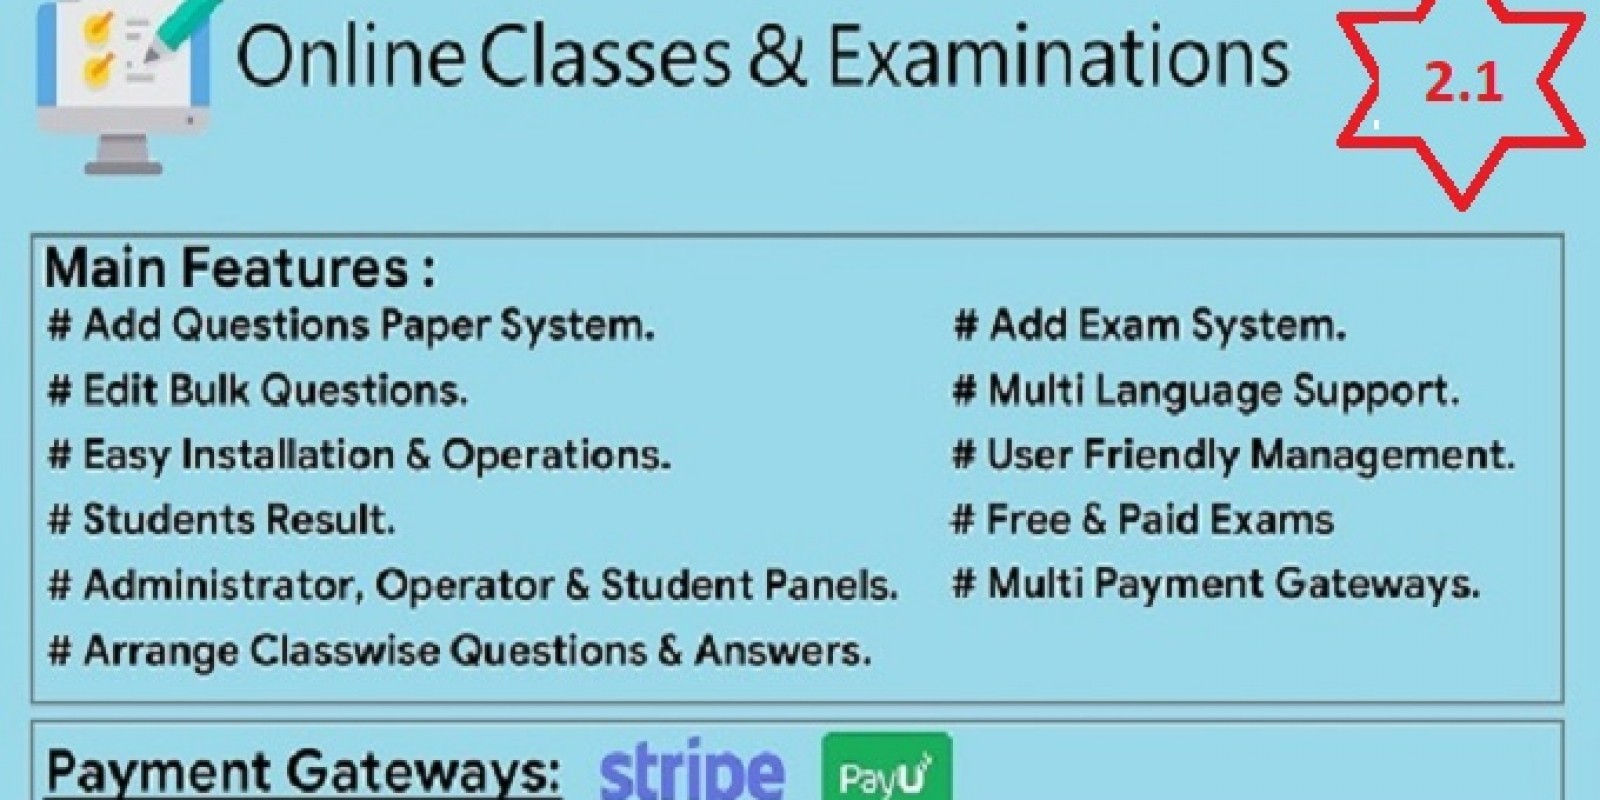 Online Classes And Examinations In CodeIgniter - PHP Script